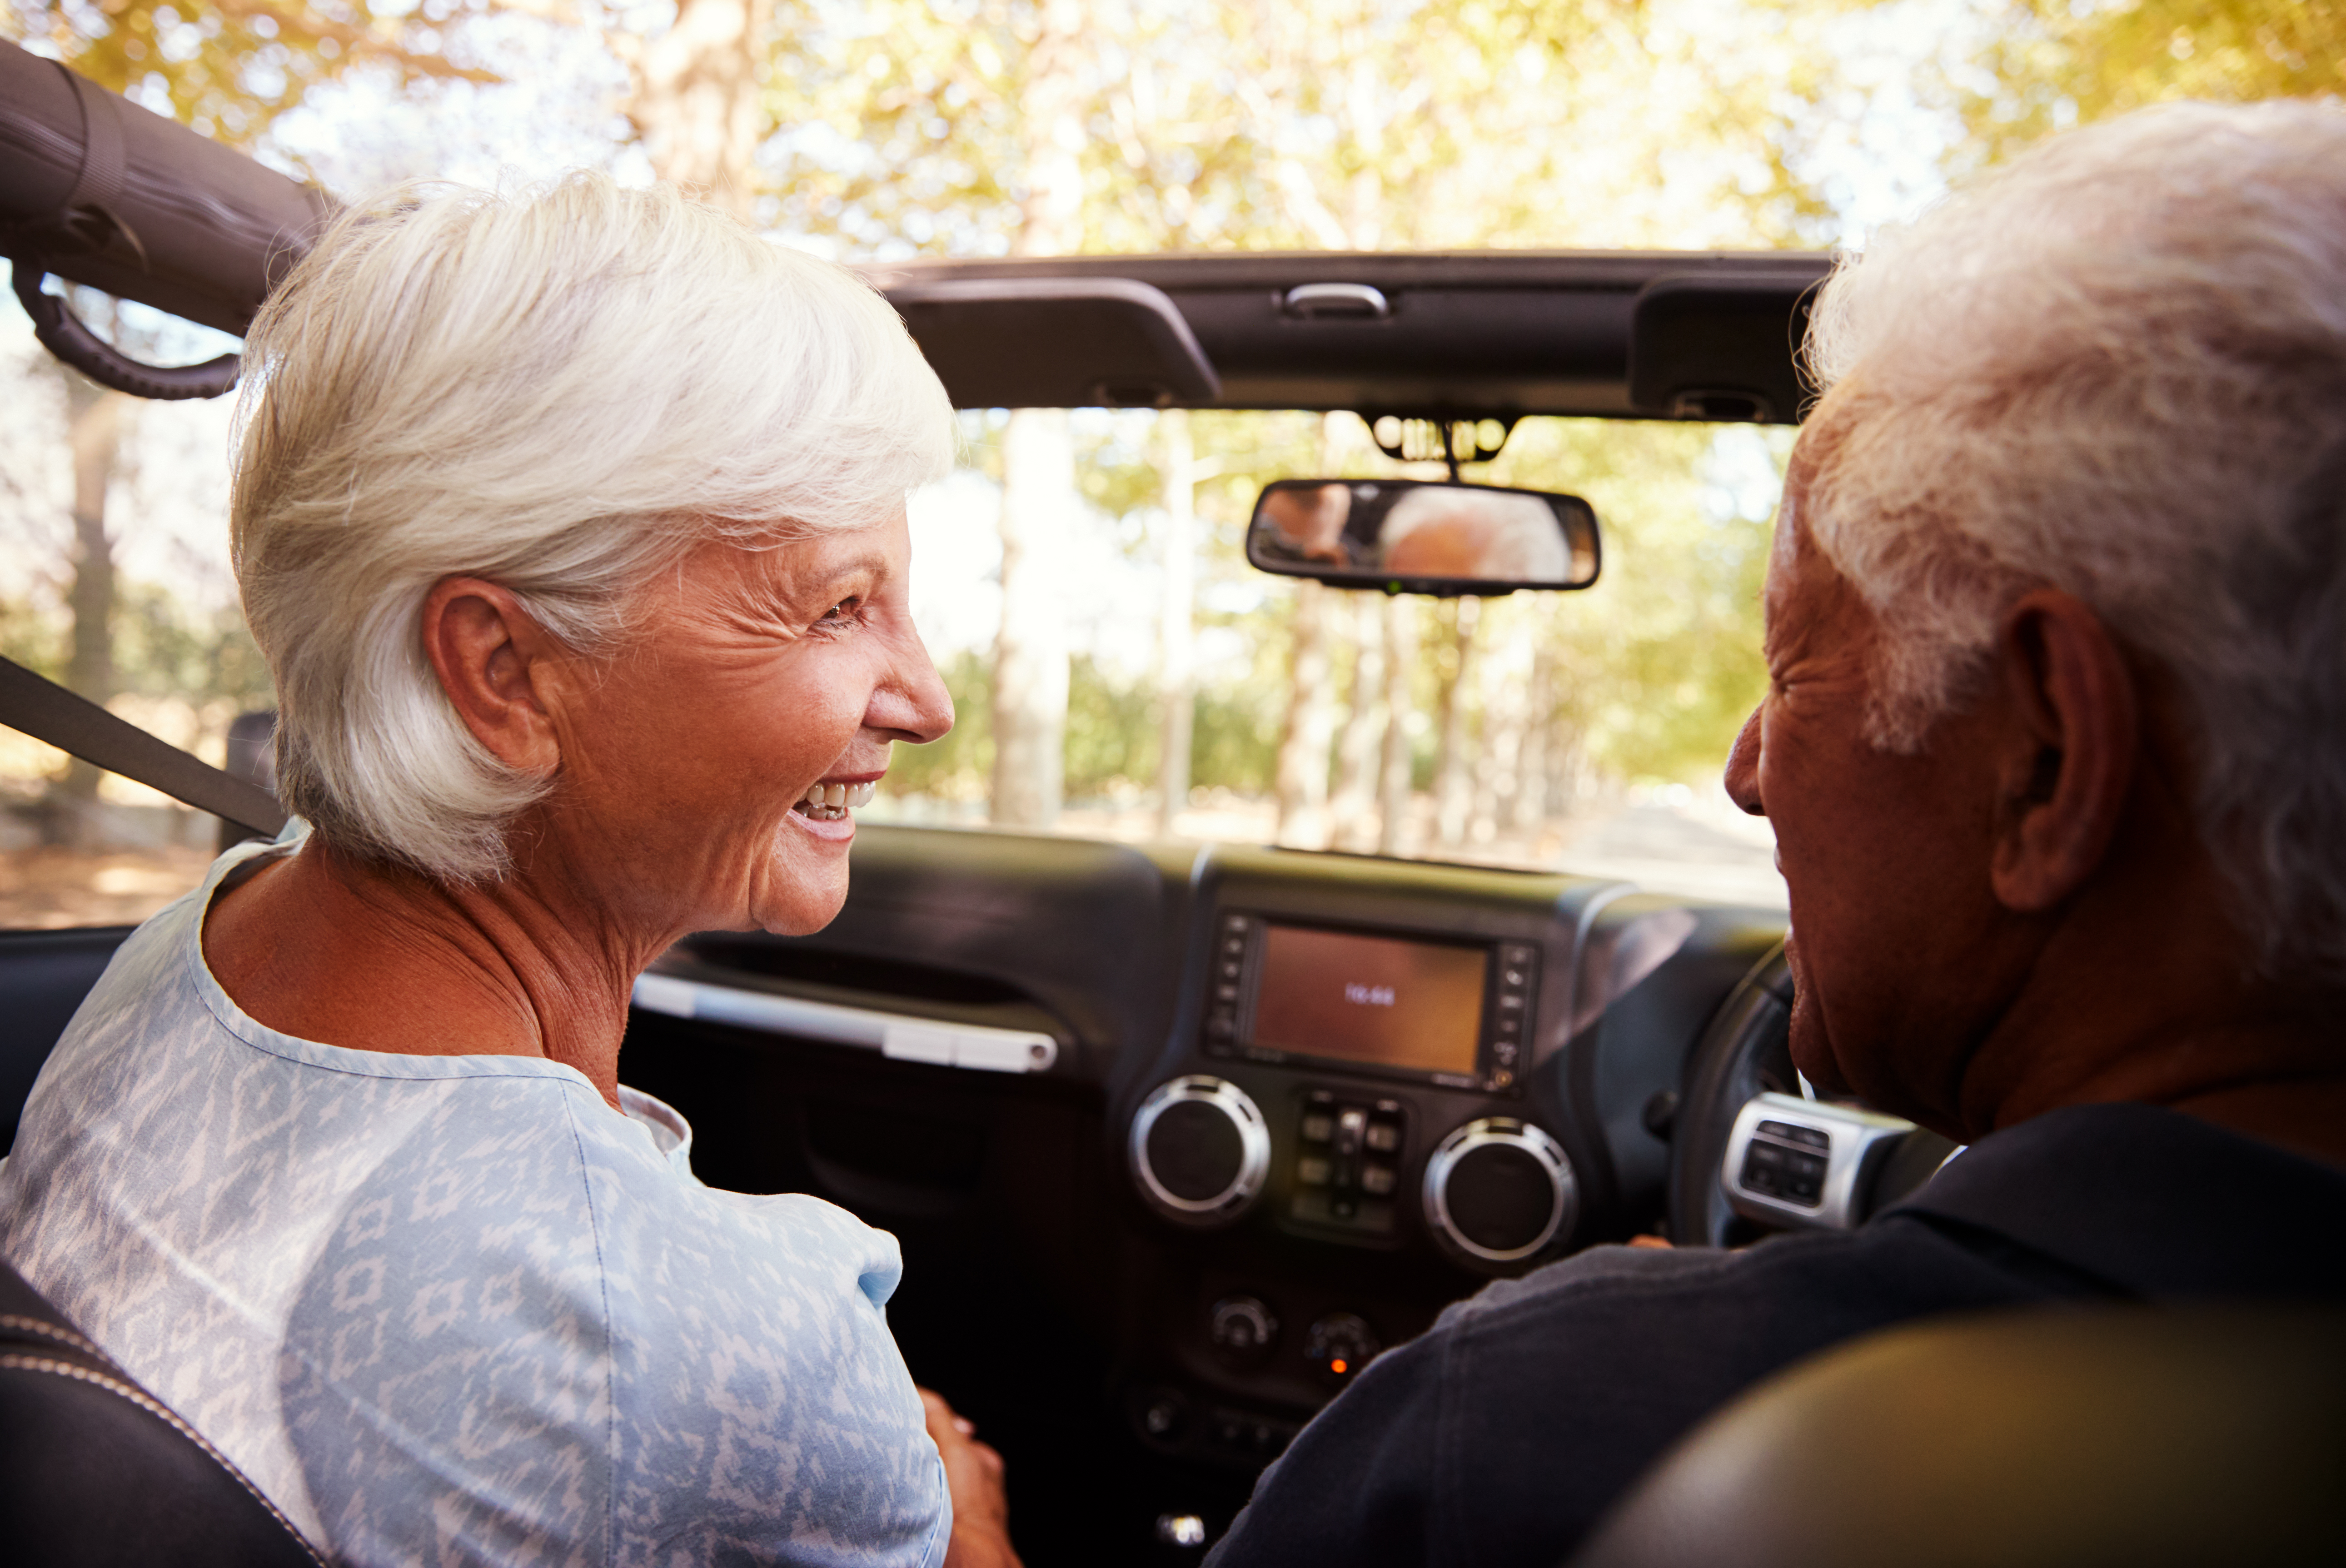 GettyImages 969662660 Elderly Drivers Do Have Car Accidents, Albuquerque